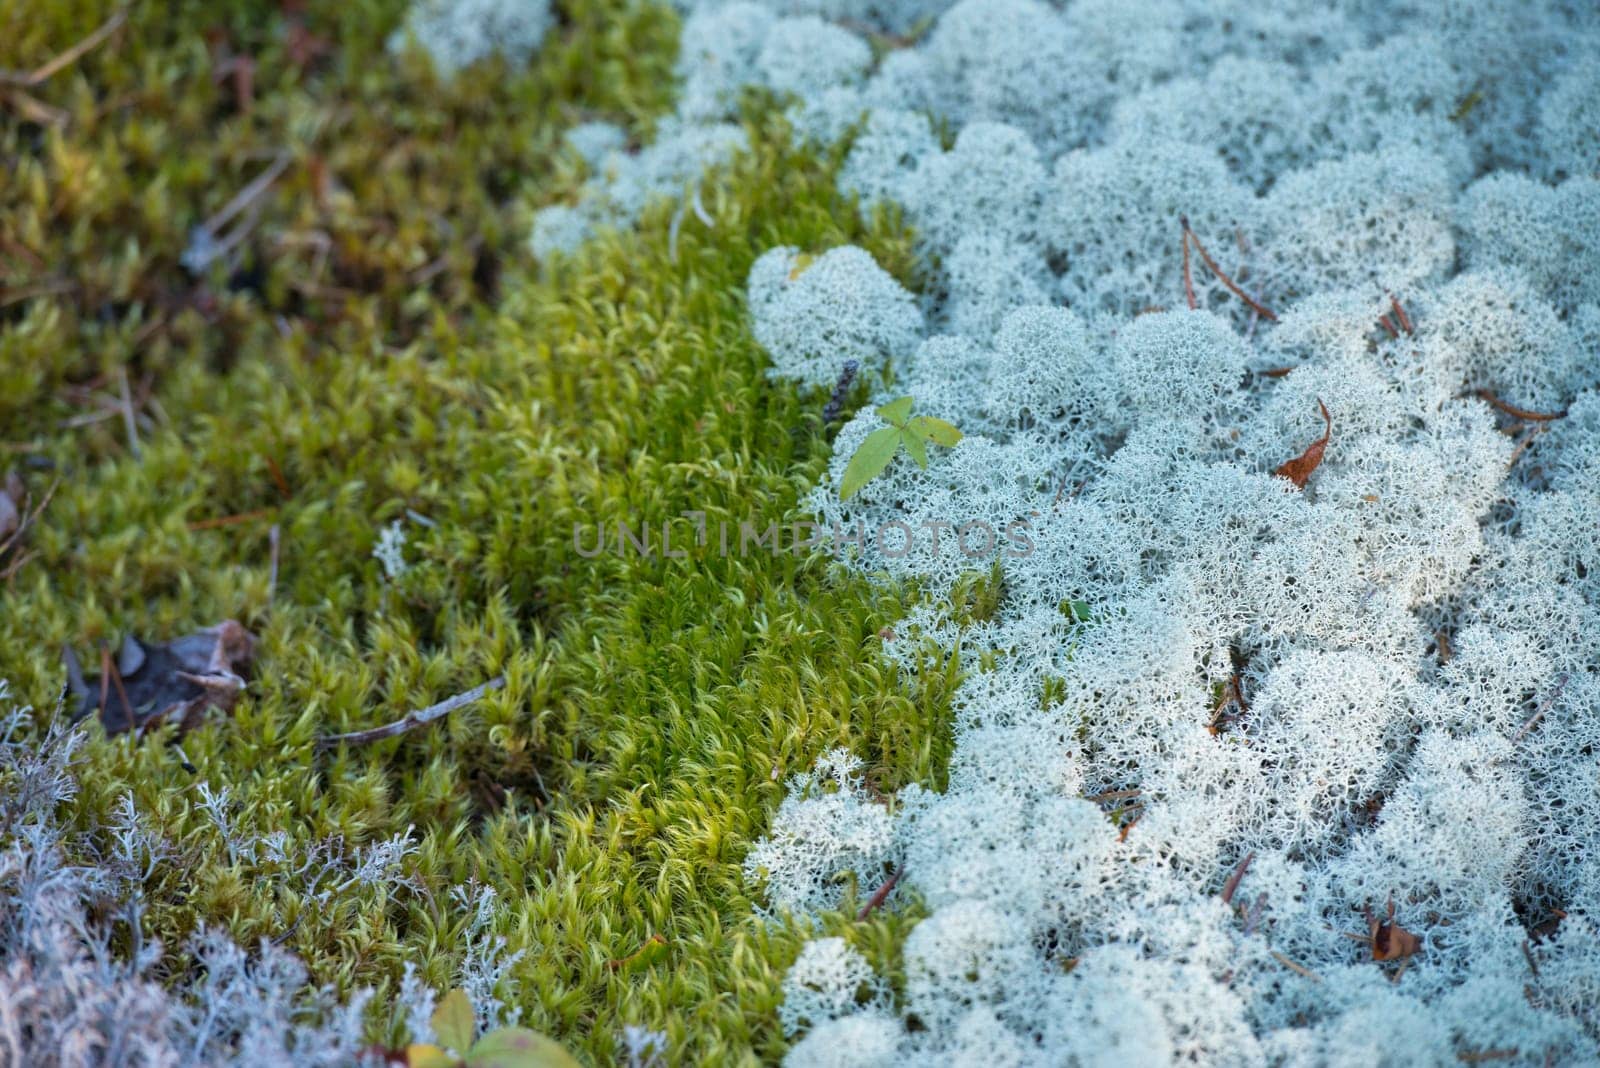 A moss-covered field detail